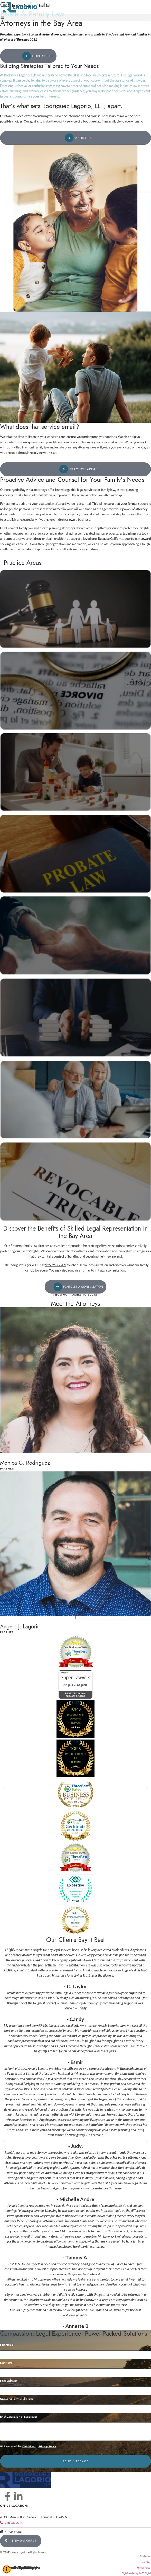 Law Offices of Angelo J. Lagorio - Fremont CA Lawyers